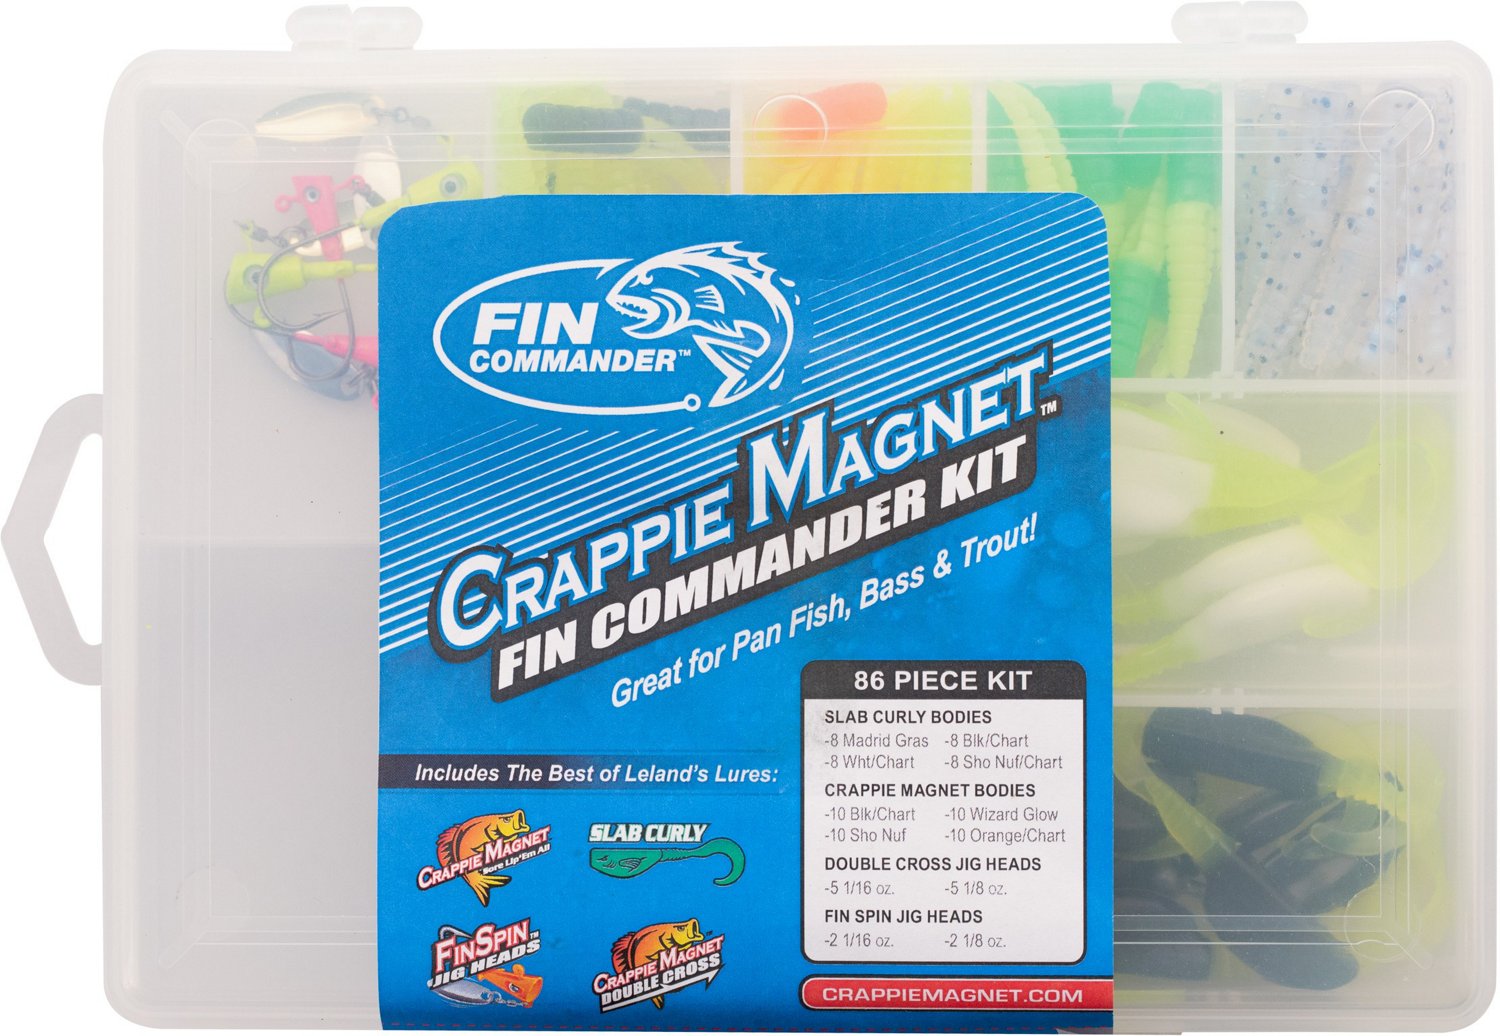 Leland Lures Fin Commander Crappie Magnet Kit | Academy